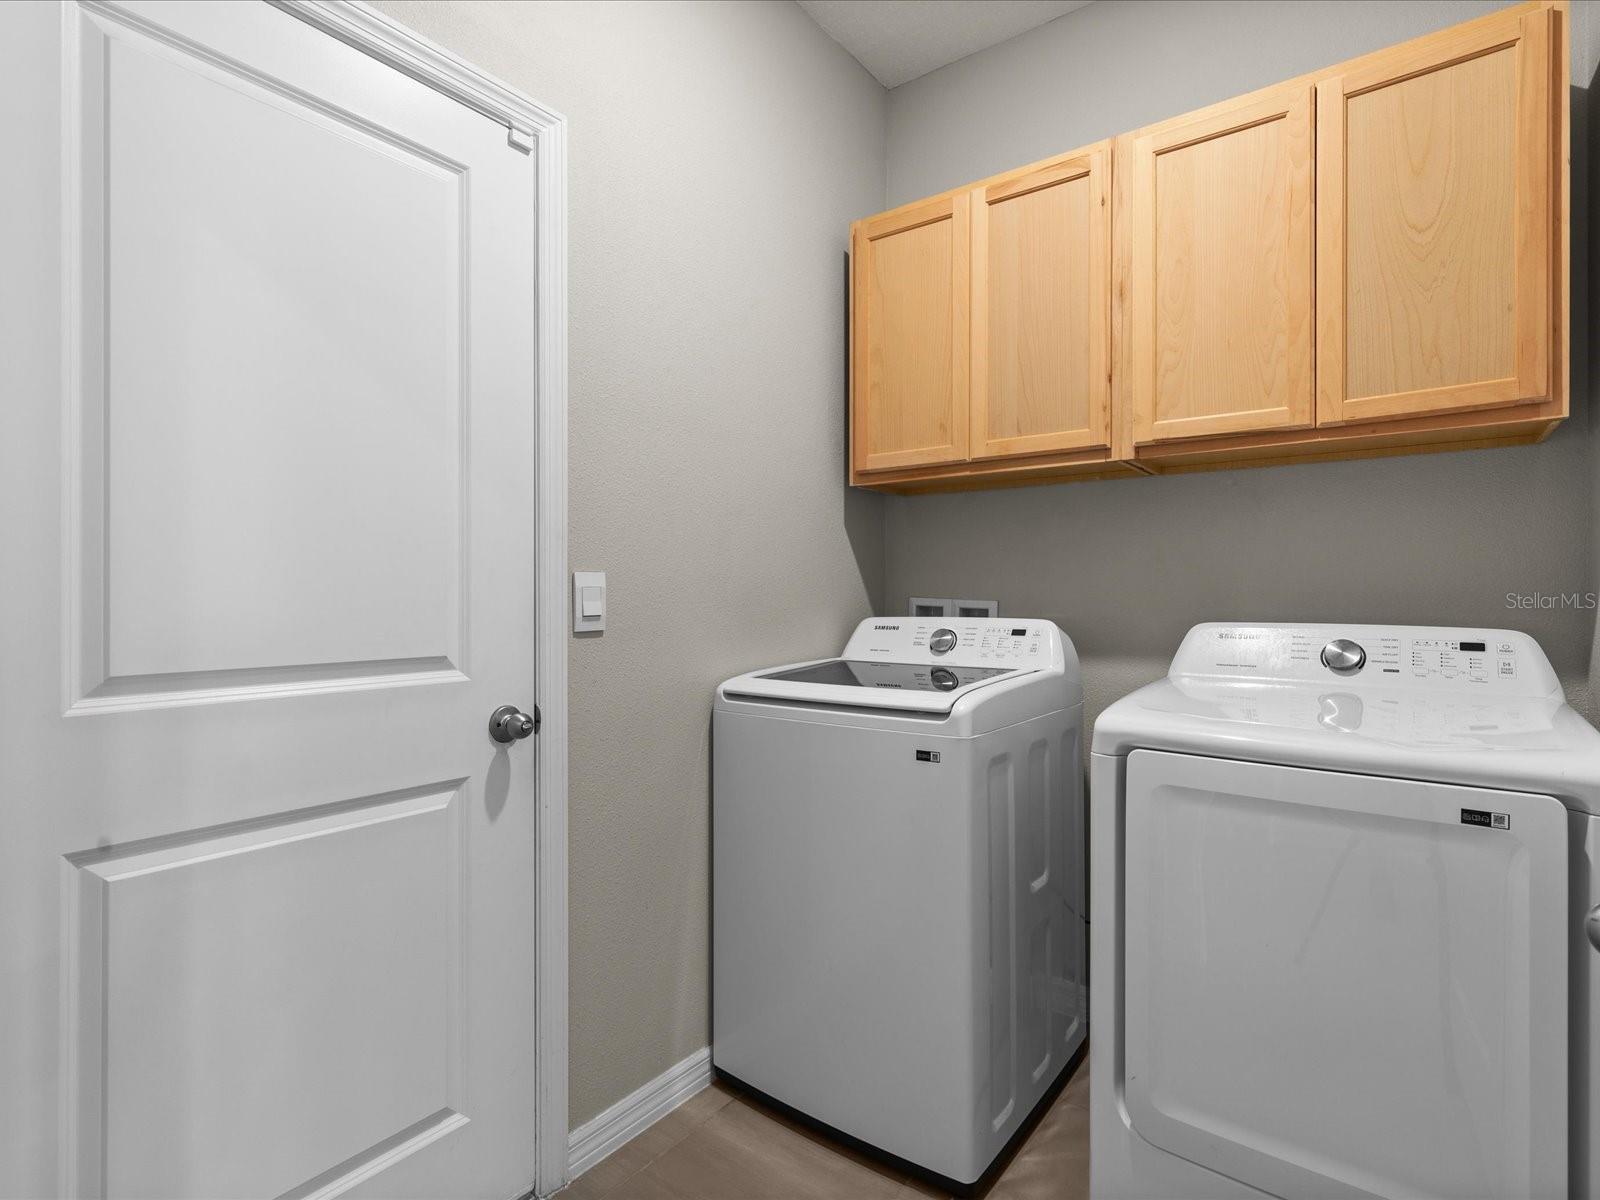 Inside Laundry room with Garage access